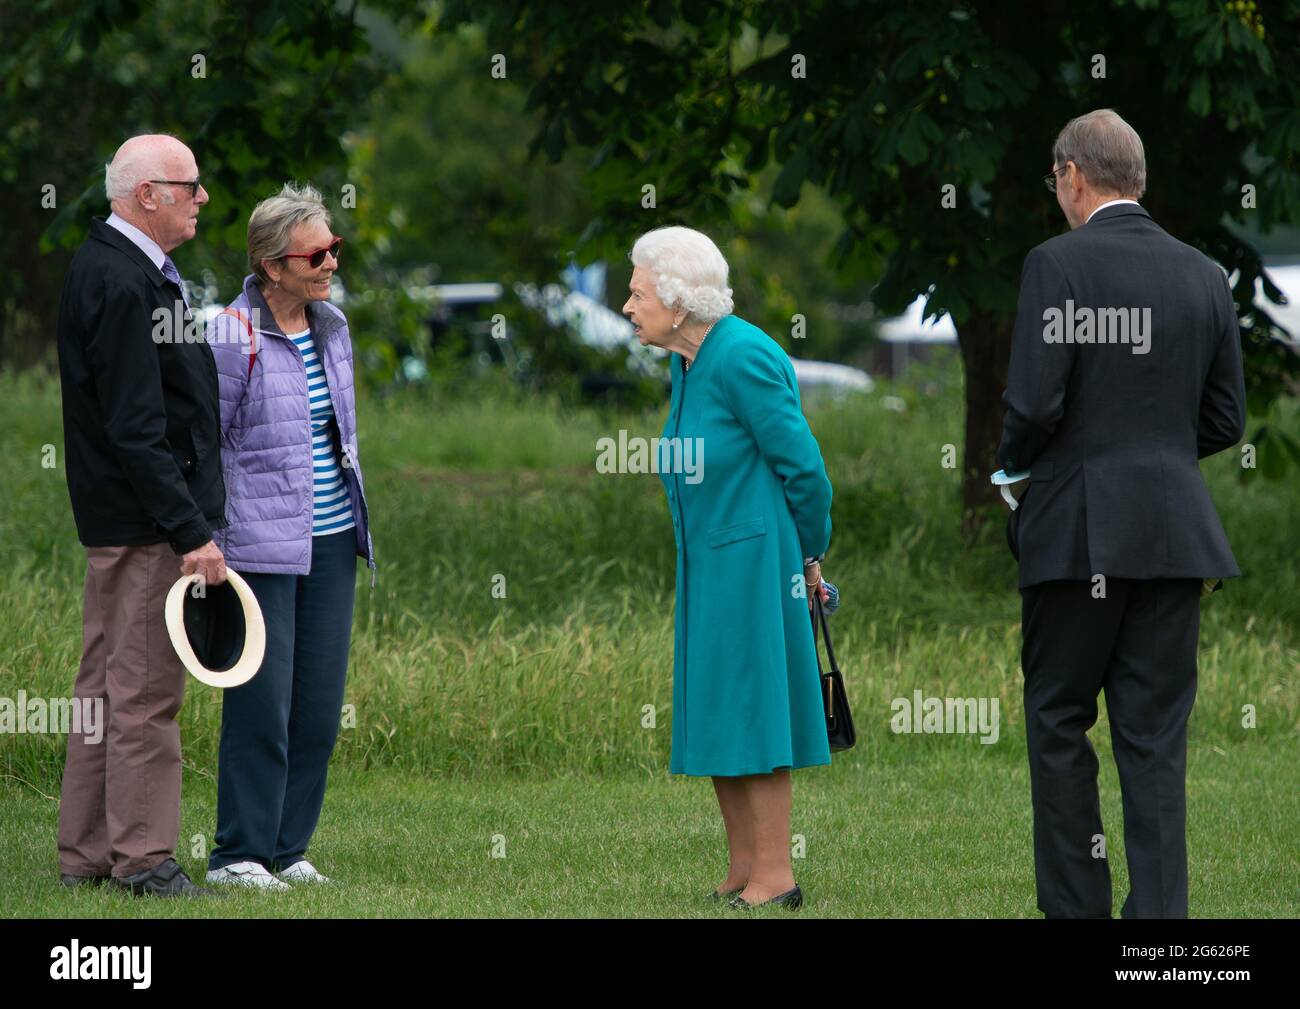 Windsor, Berkshire, UK. 1st July, 2021. After a visit to Scotland this week Queen Elizabeth II was at Royal Windsor Horse Show this afternoon to watch her horses competing. Royal Windsor Horse Show has been taking place since 1943 in the private grounds of Windsor Castle, home to Her Majesty. Credit: Maureen McLean/Alamy Stock Photo